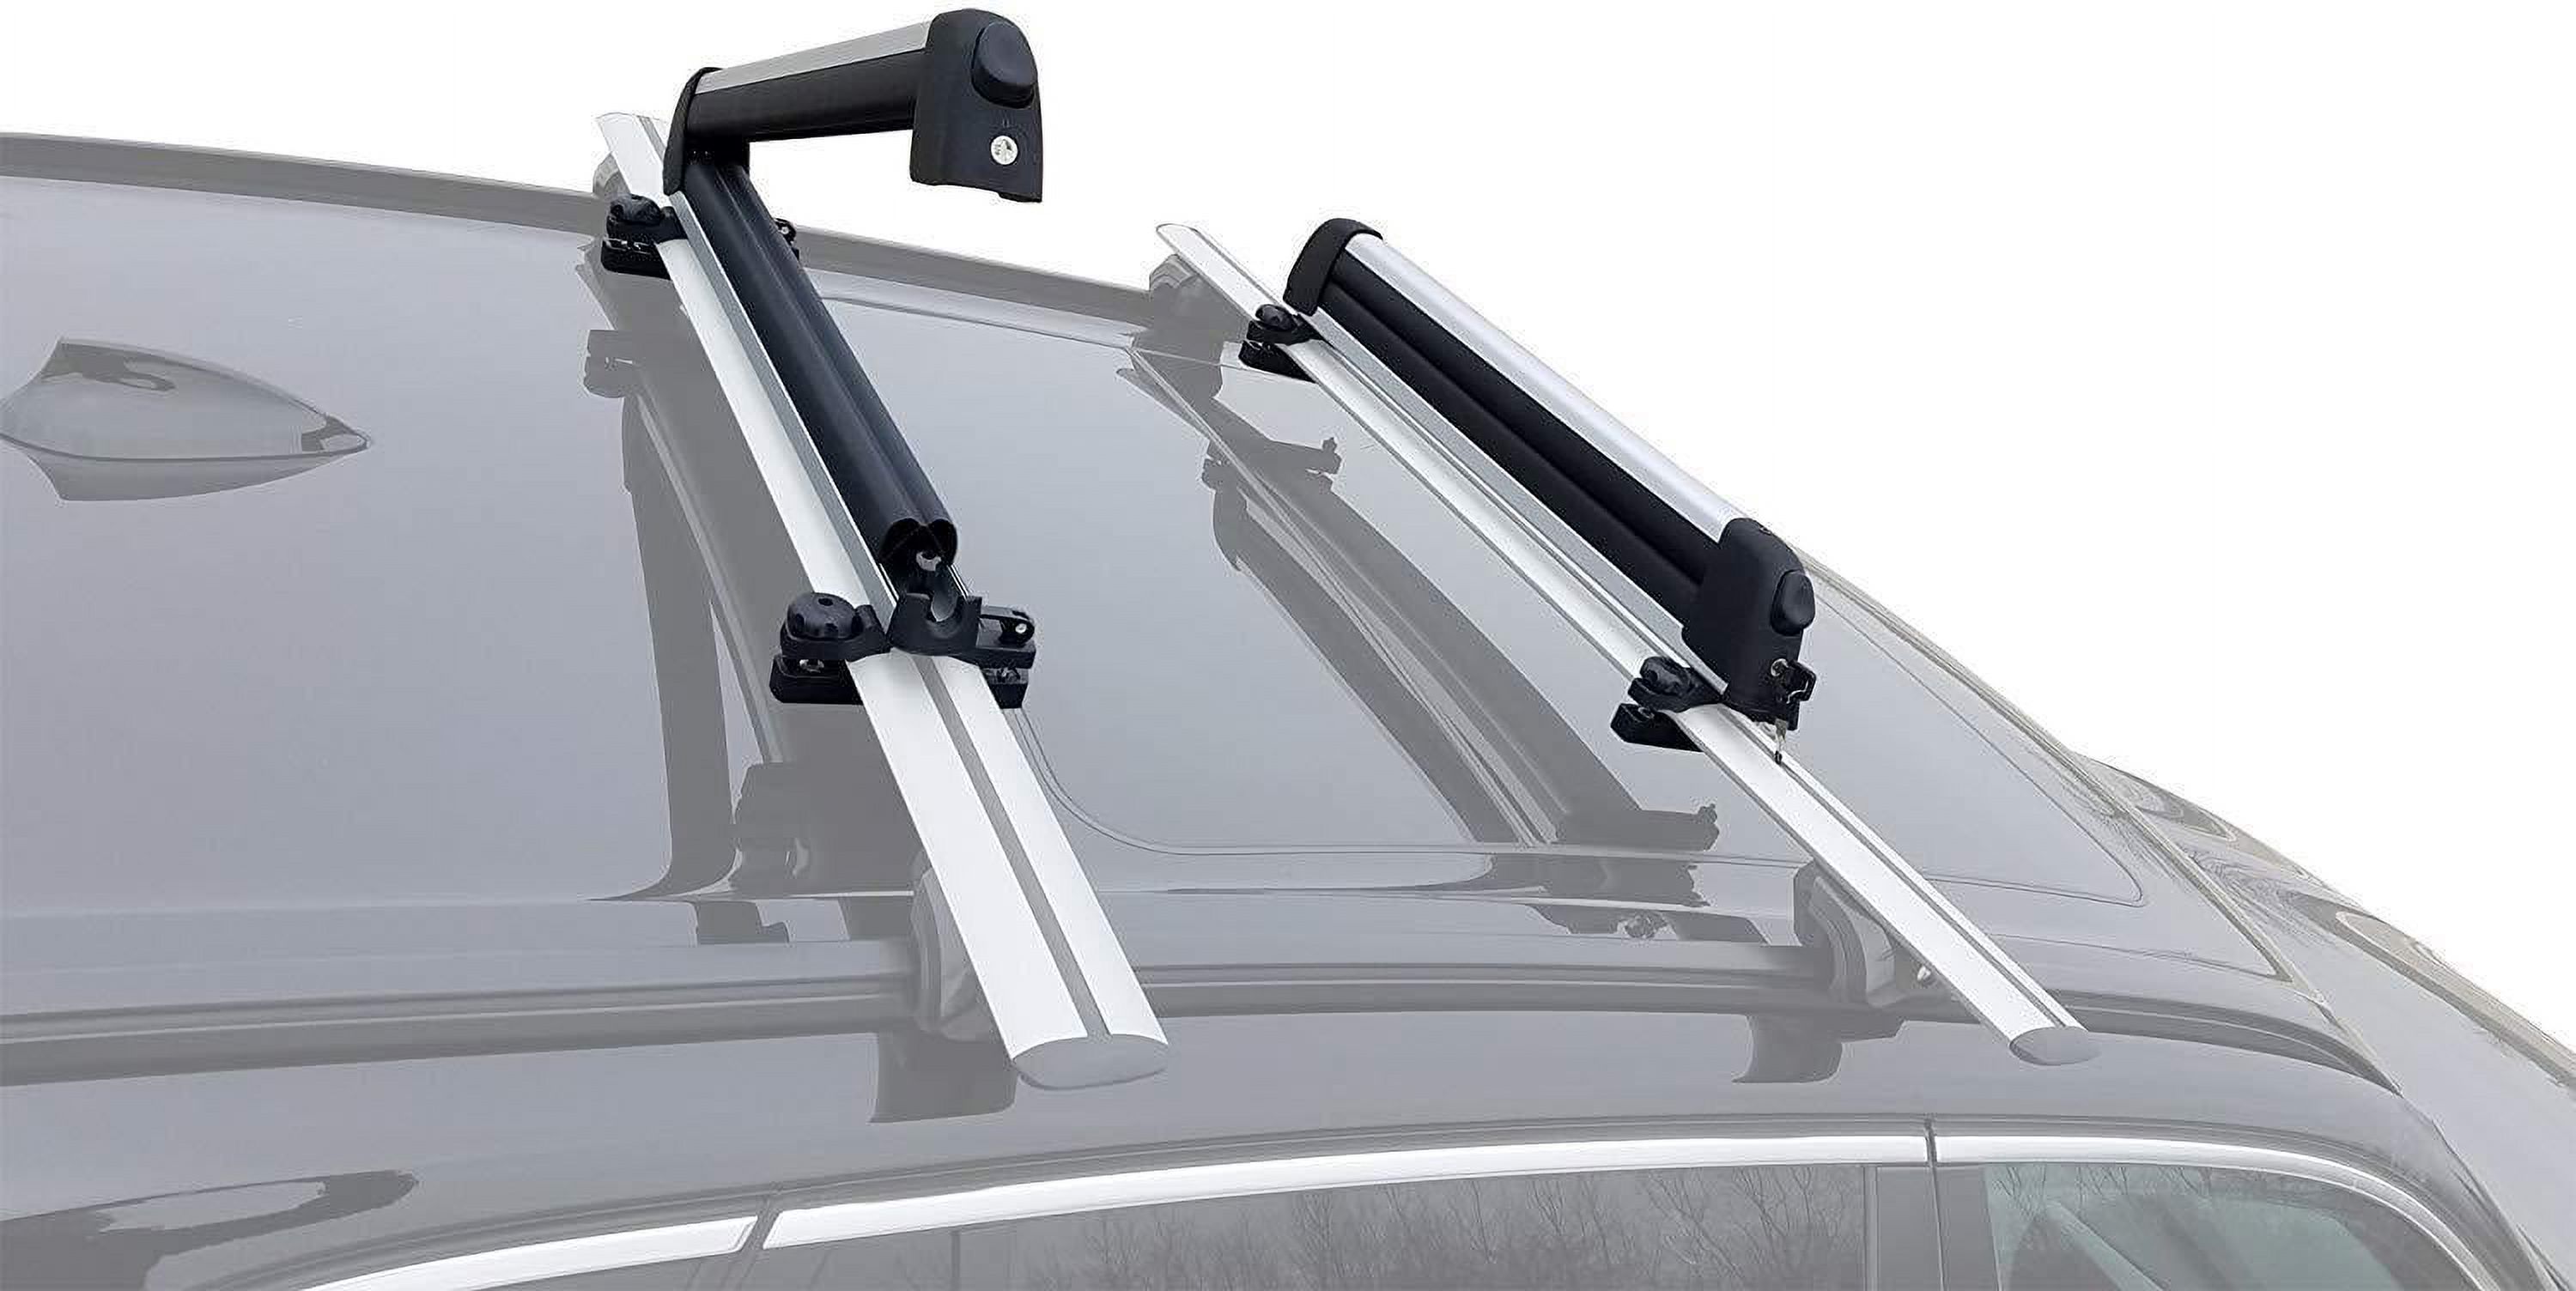 BRIGHTLINES Universal Ski Snowboard Racks Carriers 2pcs Mount on Vehicle Top Cross Bars (Up to 4 Skis or 2 Snowboards) - image 1 of 9